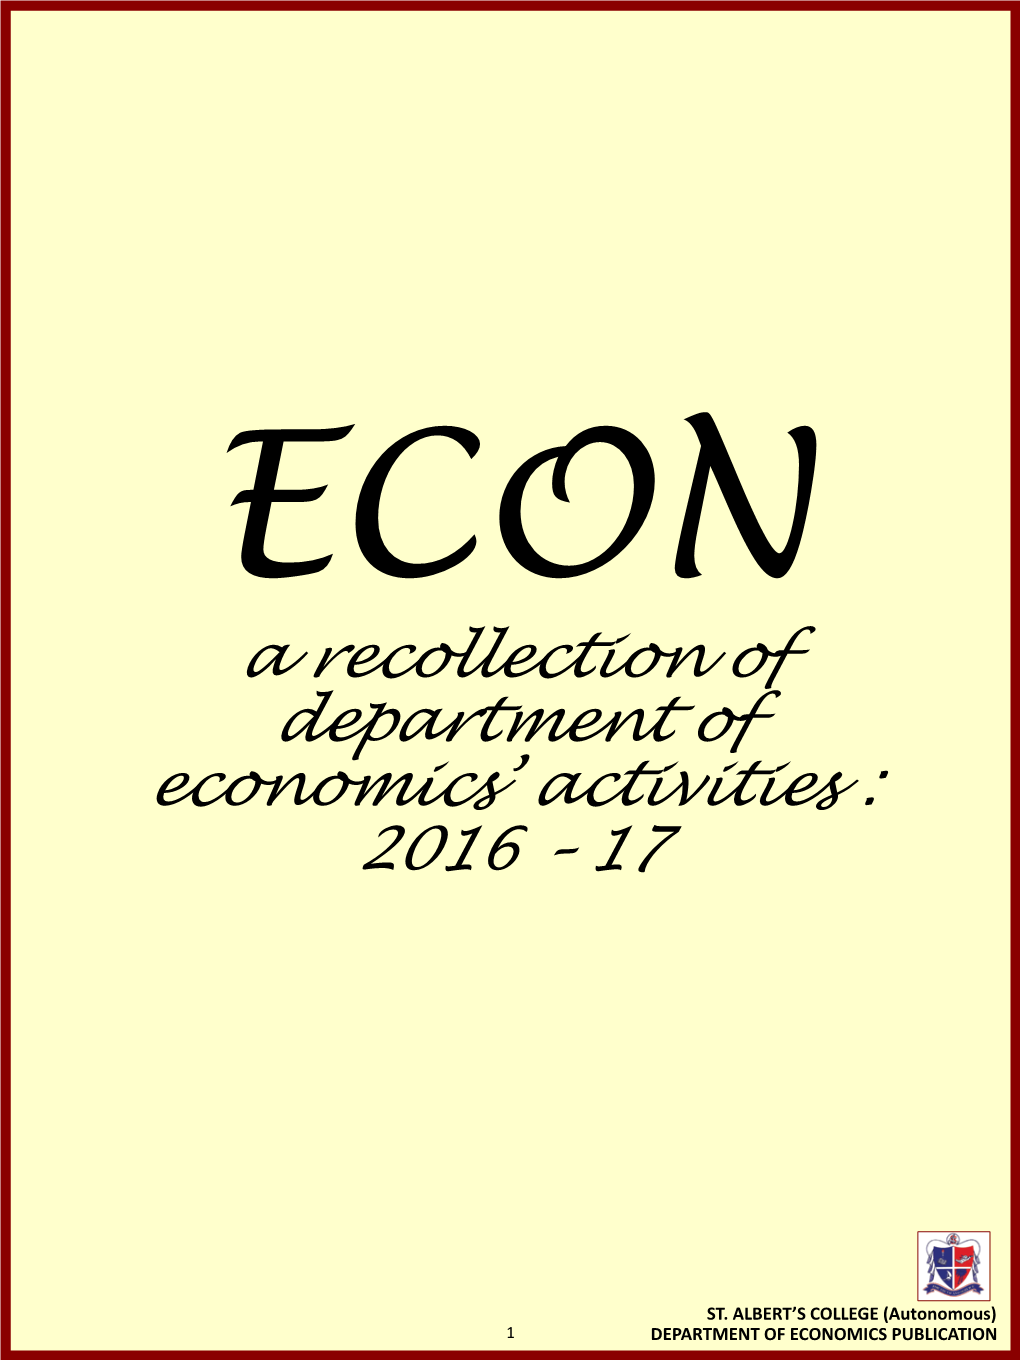 ECON a Recollection of 2016 – 17 Department Activities